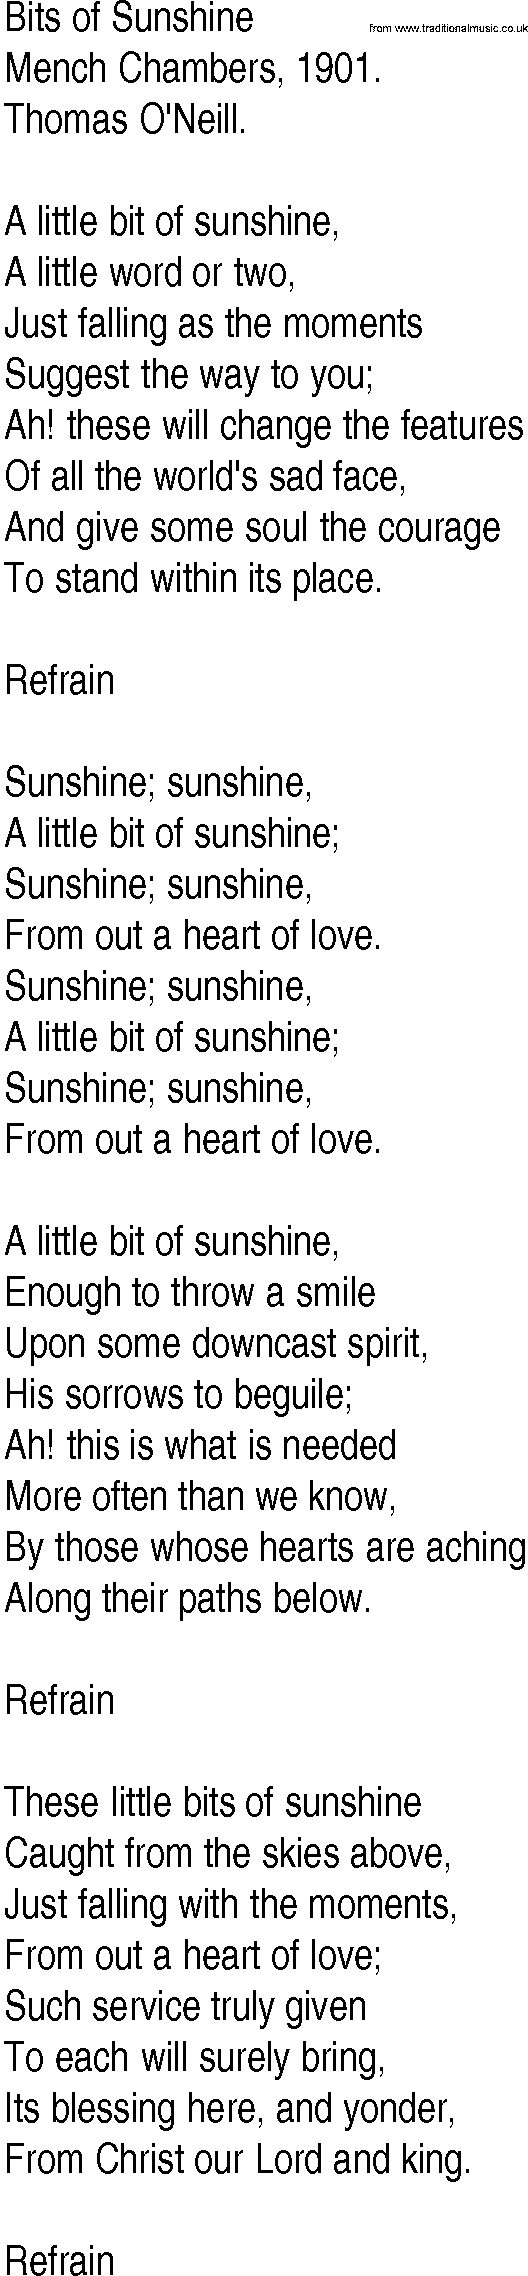 Hymn and Gospel Song: Bits of Sunshine by Mench Chambers lyrics